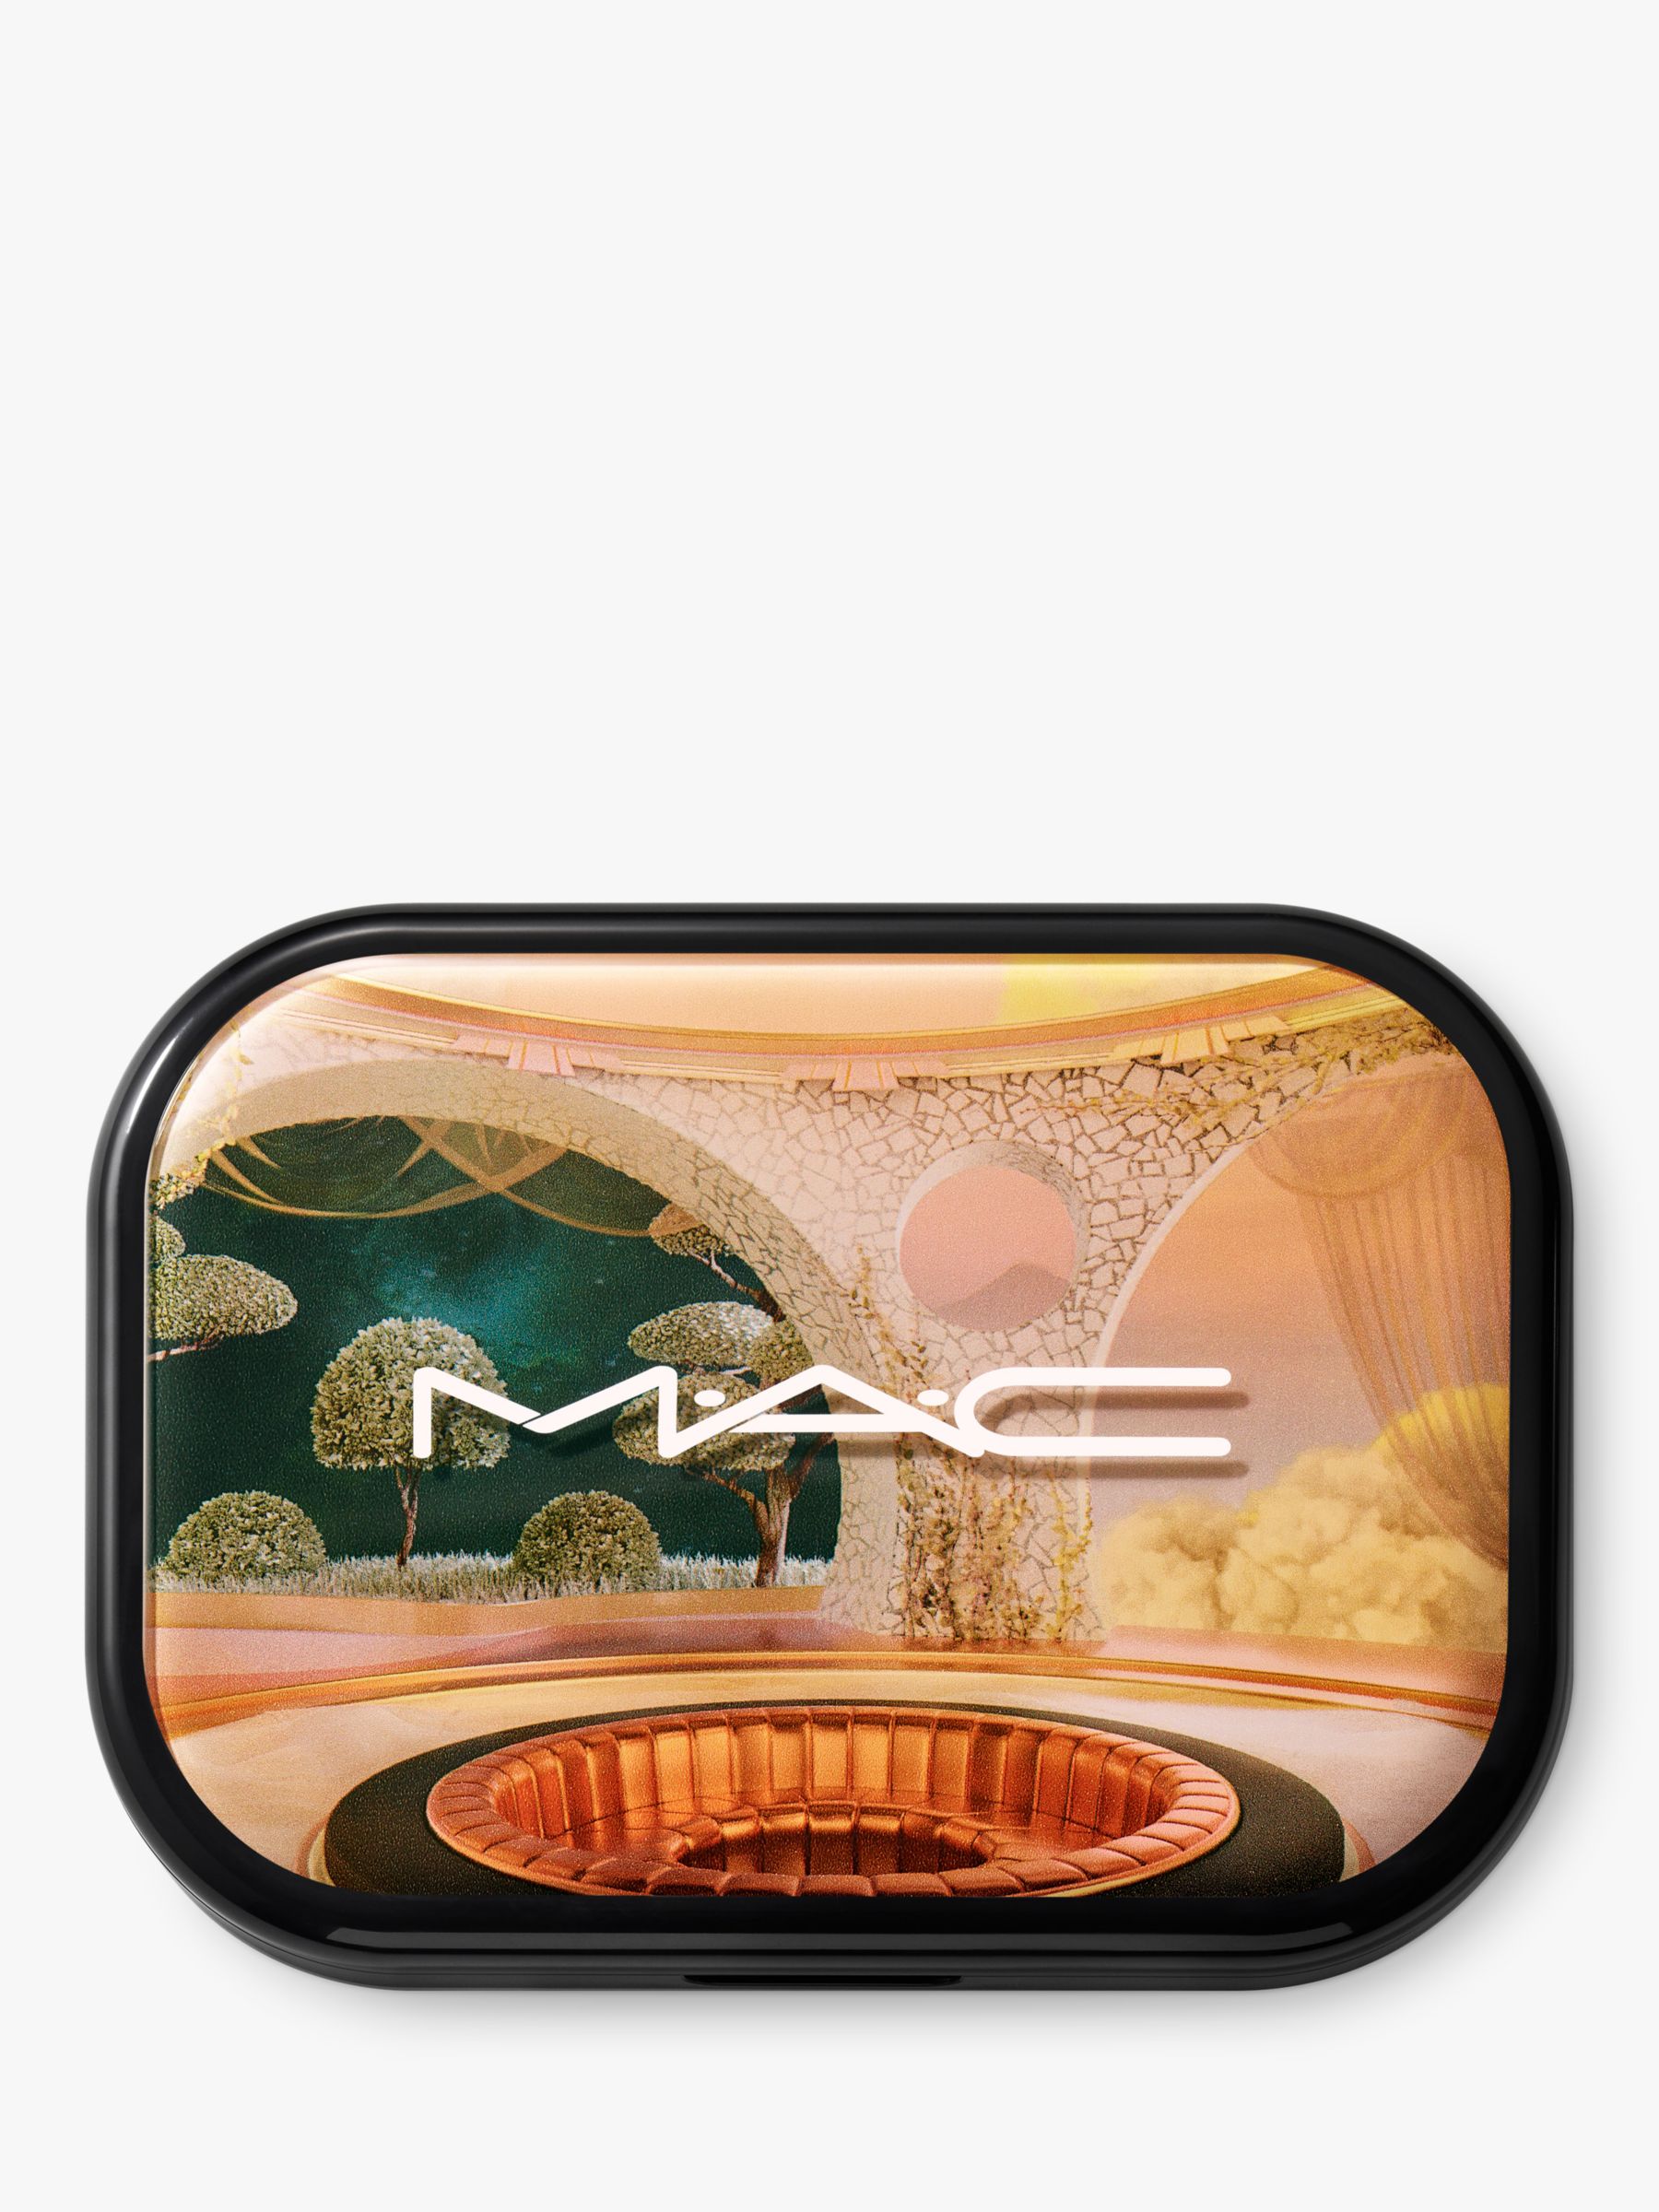 MAC Connect In Colour Eyeshadow Palette, Bronze Influence 2